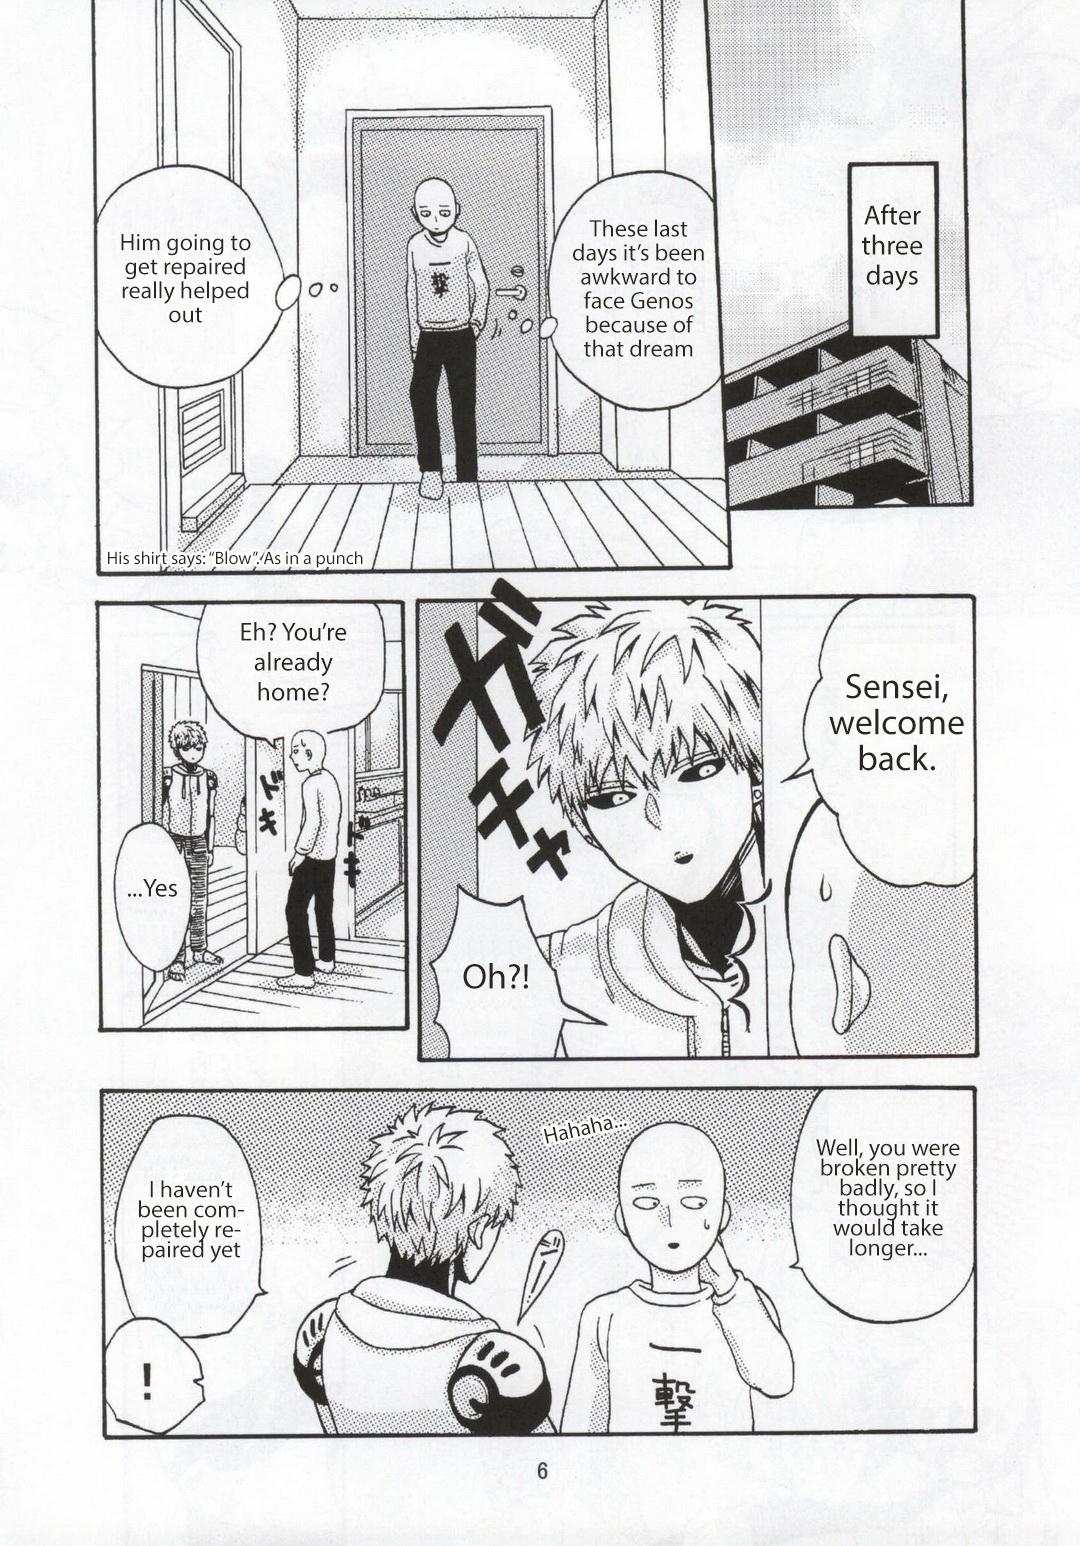 Story NATURAL JUNKIE - One punch man Verified Profile - Page 6